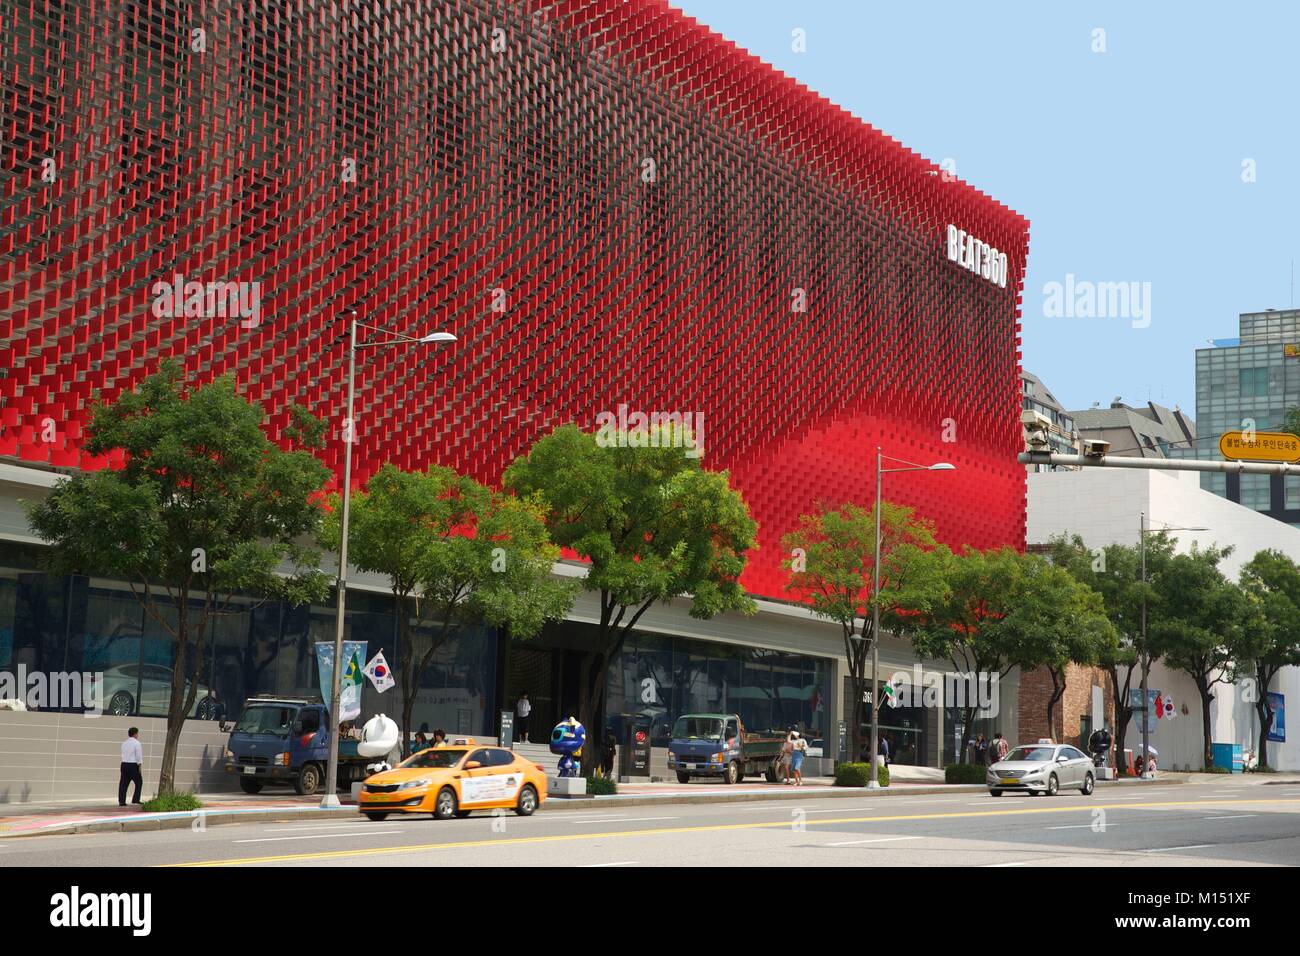 South Korea, Seoul, Gangnam district, Apgujeong, building with red design of Beat 360, Kia brand cultural and commercial space Stock Photo